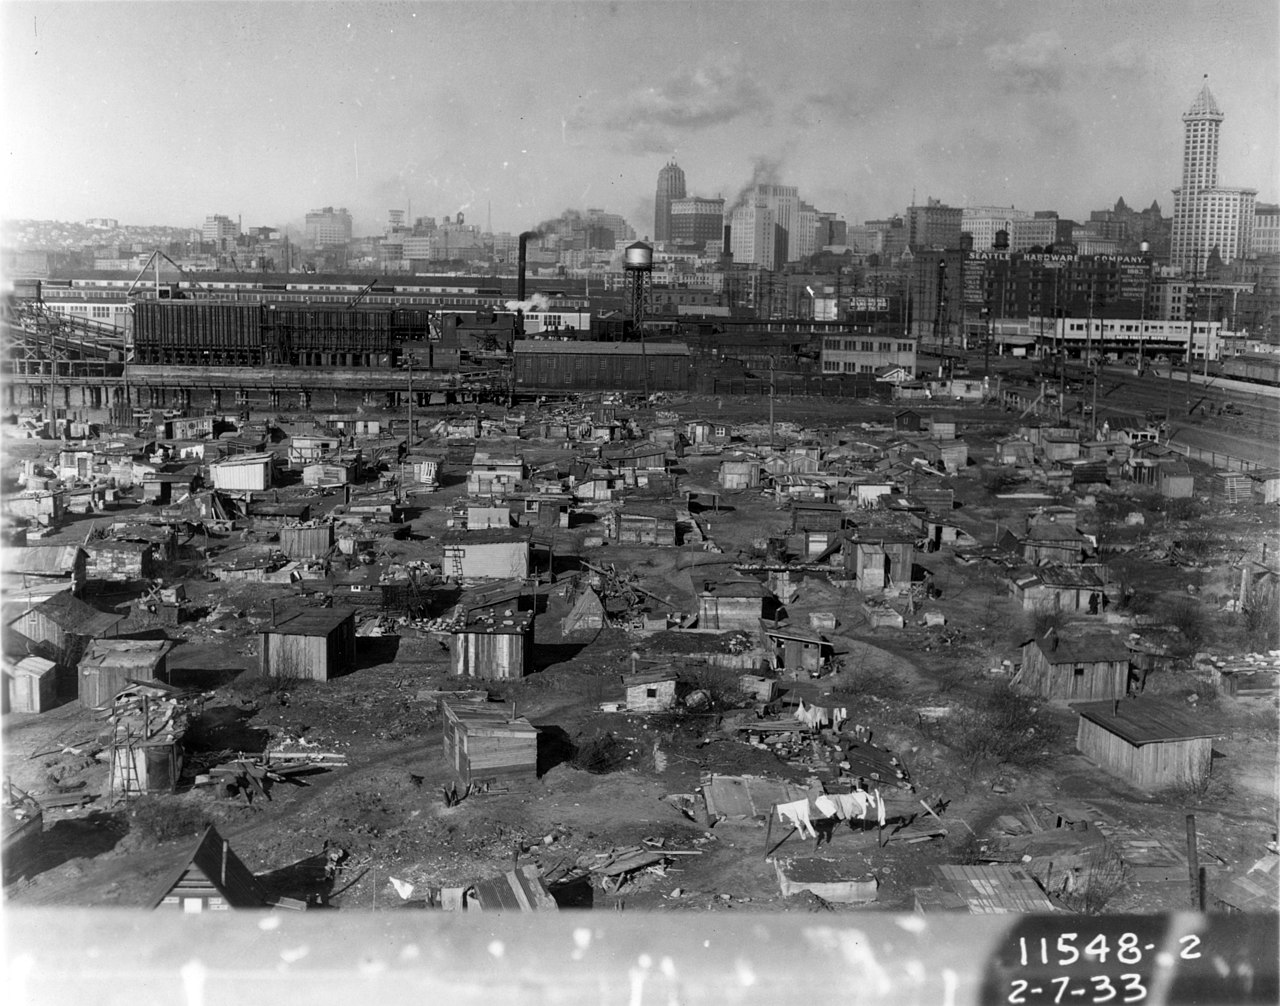 1280px-Hooverville_on_the_Seattle_tideflats%2C_1933_%2850495168952%29